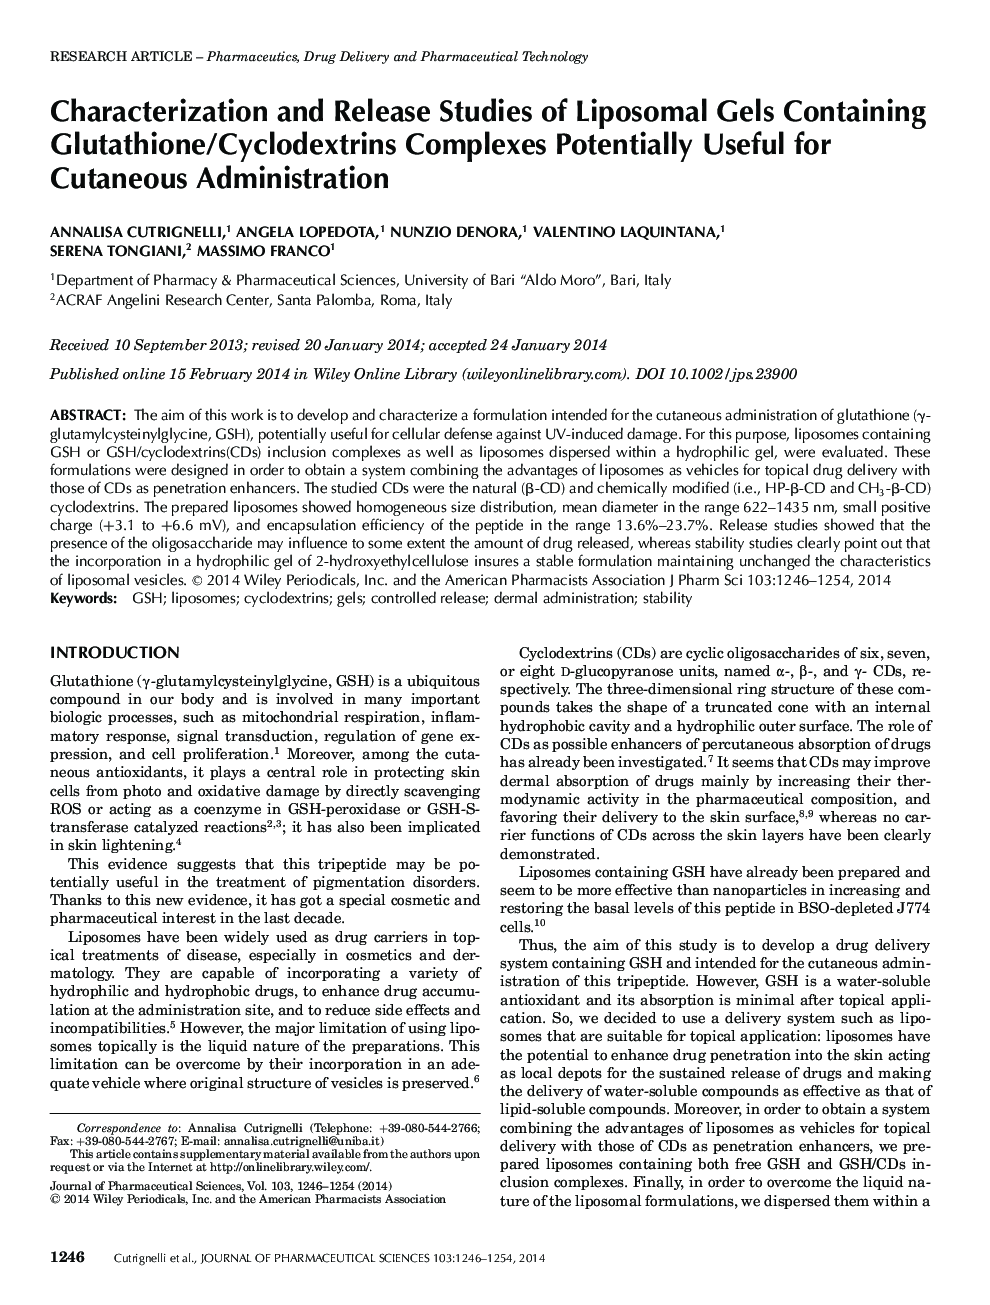 Characterization and Release Studies of Liposomal Gels Containing Glutathione/Cyclodextrins Complexes Potentially Useful for Cutaneous Administration